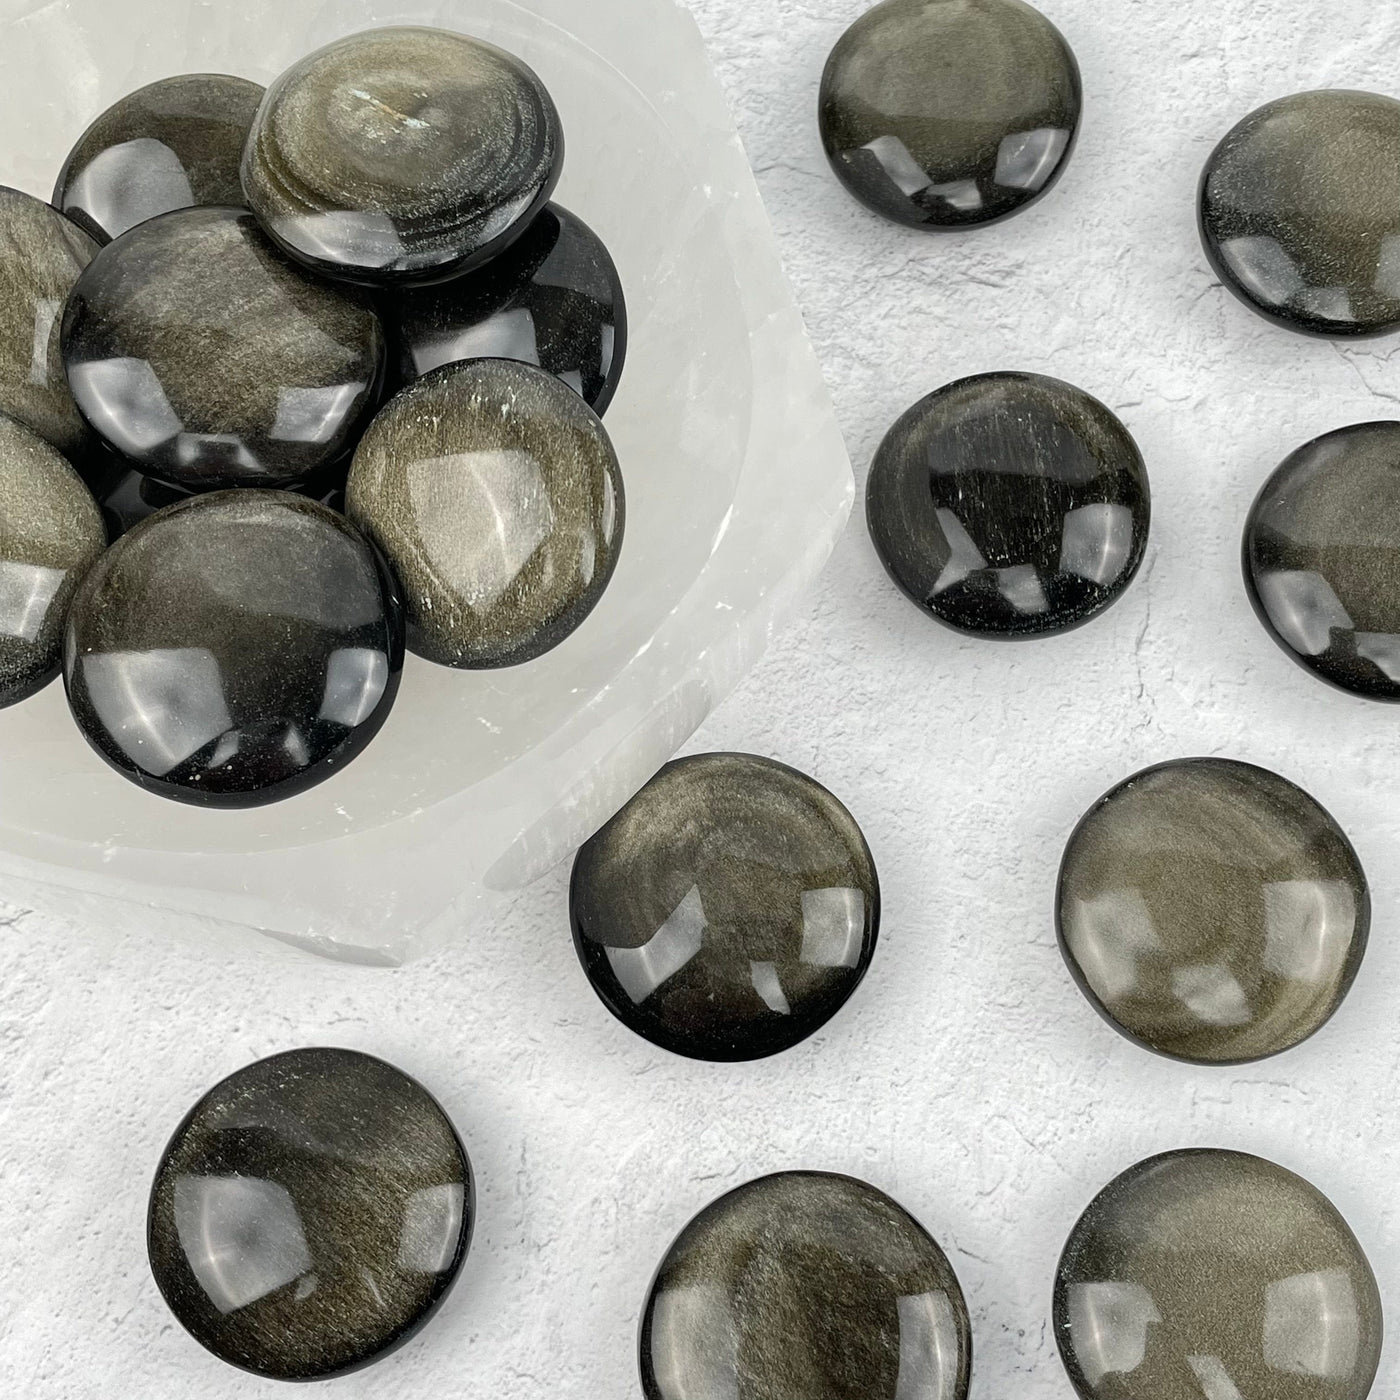 multiple polished stones displayed to show the differences in the color shades and sizes 